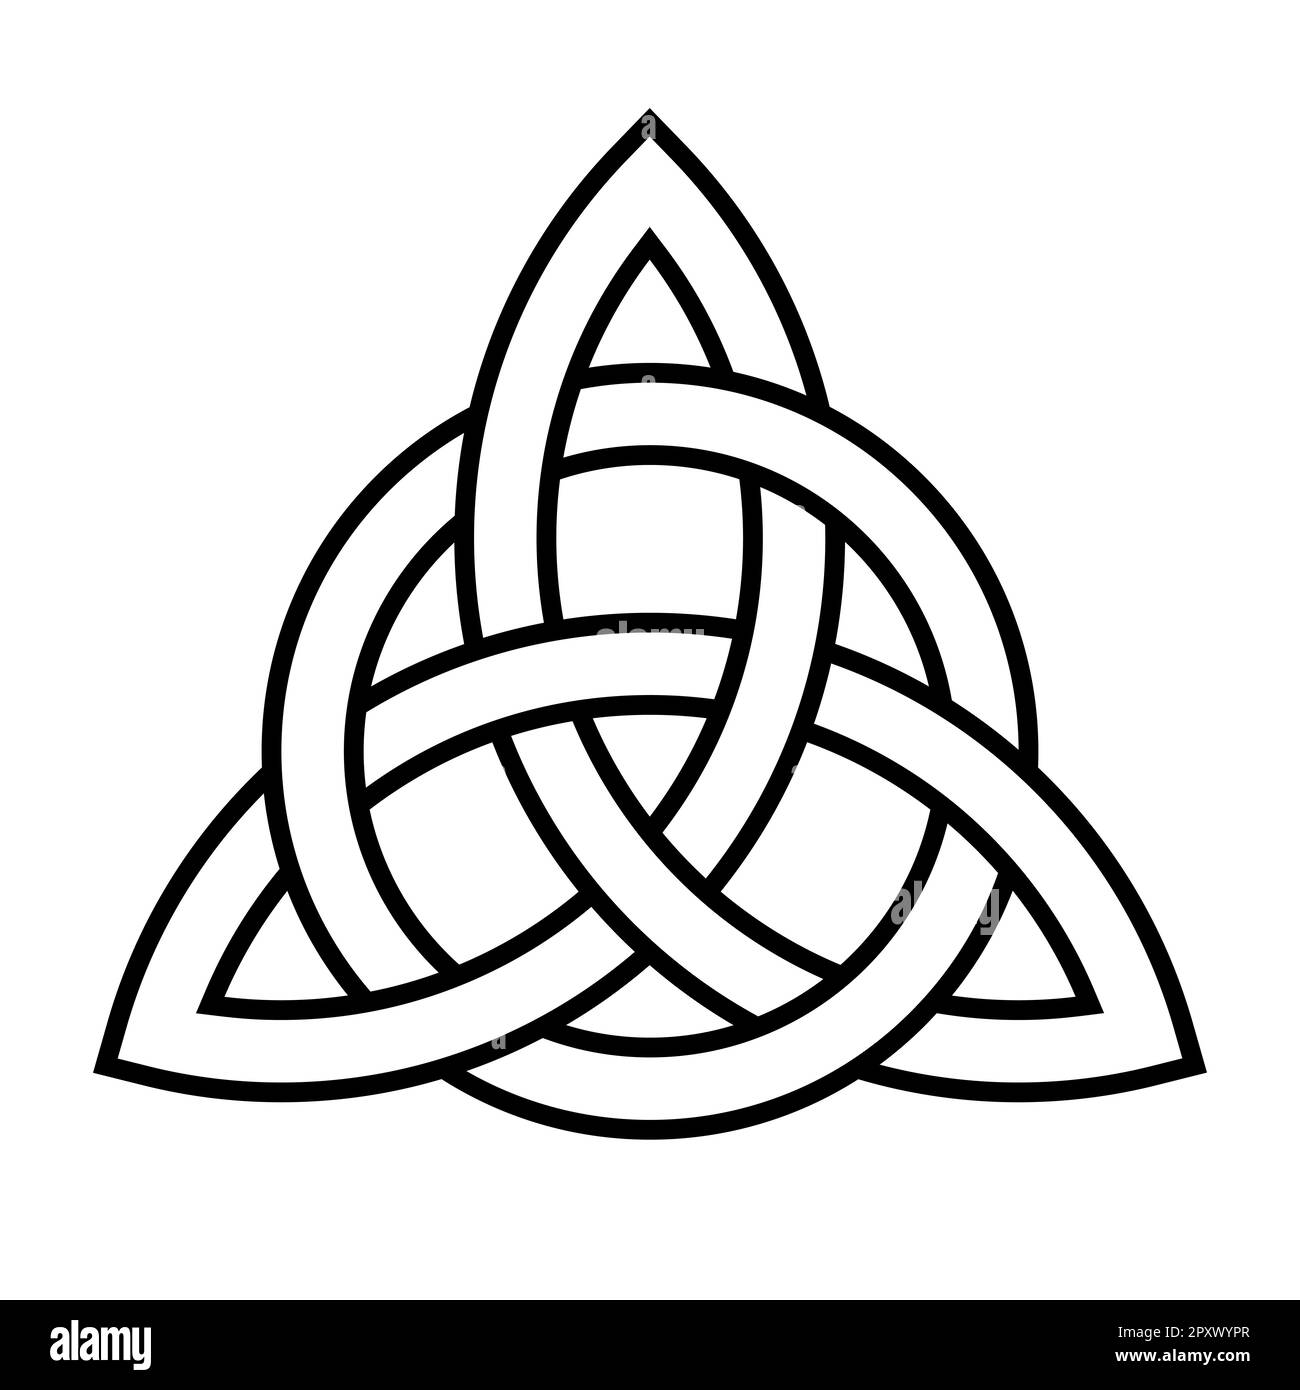 Triquetra with interlaced circle. Symbol for the Trinity, formed by interlacing arcs, representing the inseparably linked Father, Son and Holy Spirit. Stock Photo